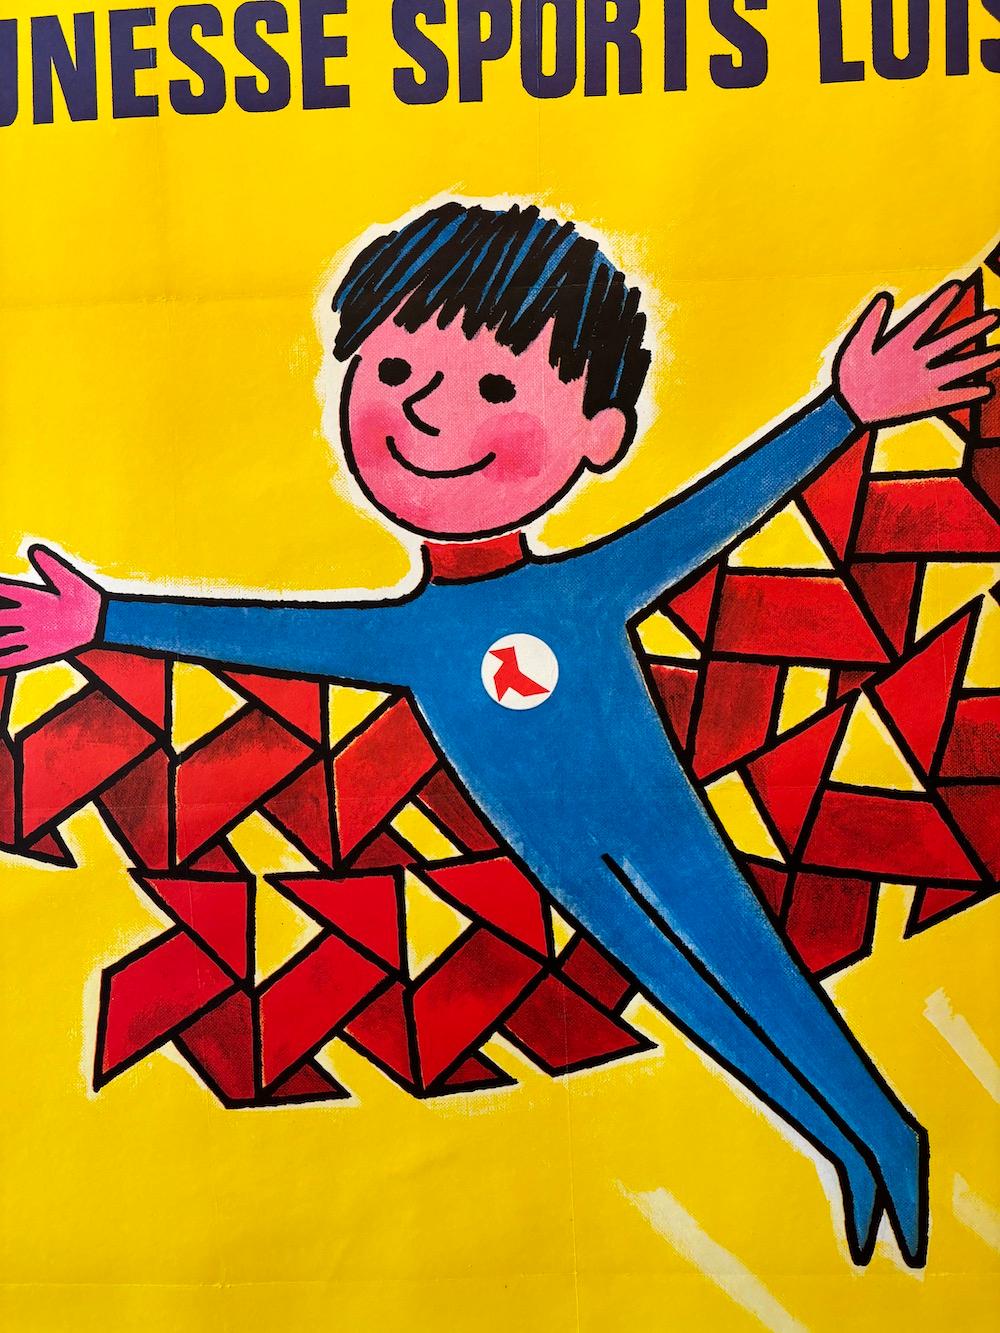 French Original Vintage Advertising Poster, 32E Salso De L’enfance HERVE MORVAN 

Just like superman, this poster is advertising a festival for children. Designed by Herve Morvan in 1979. This is an original vintage poster, it has been linen backed